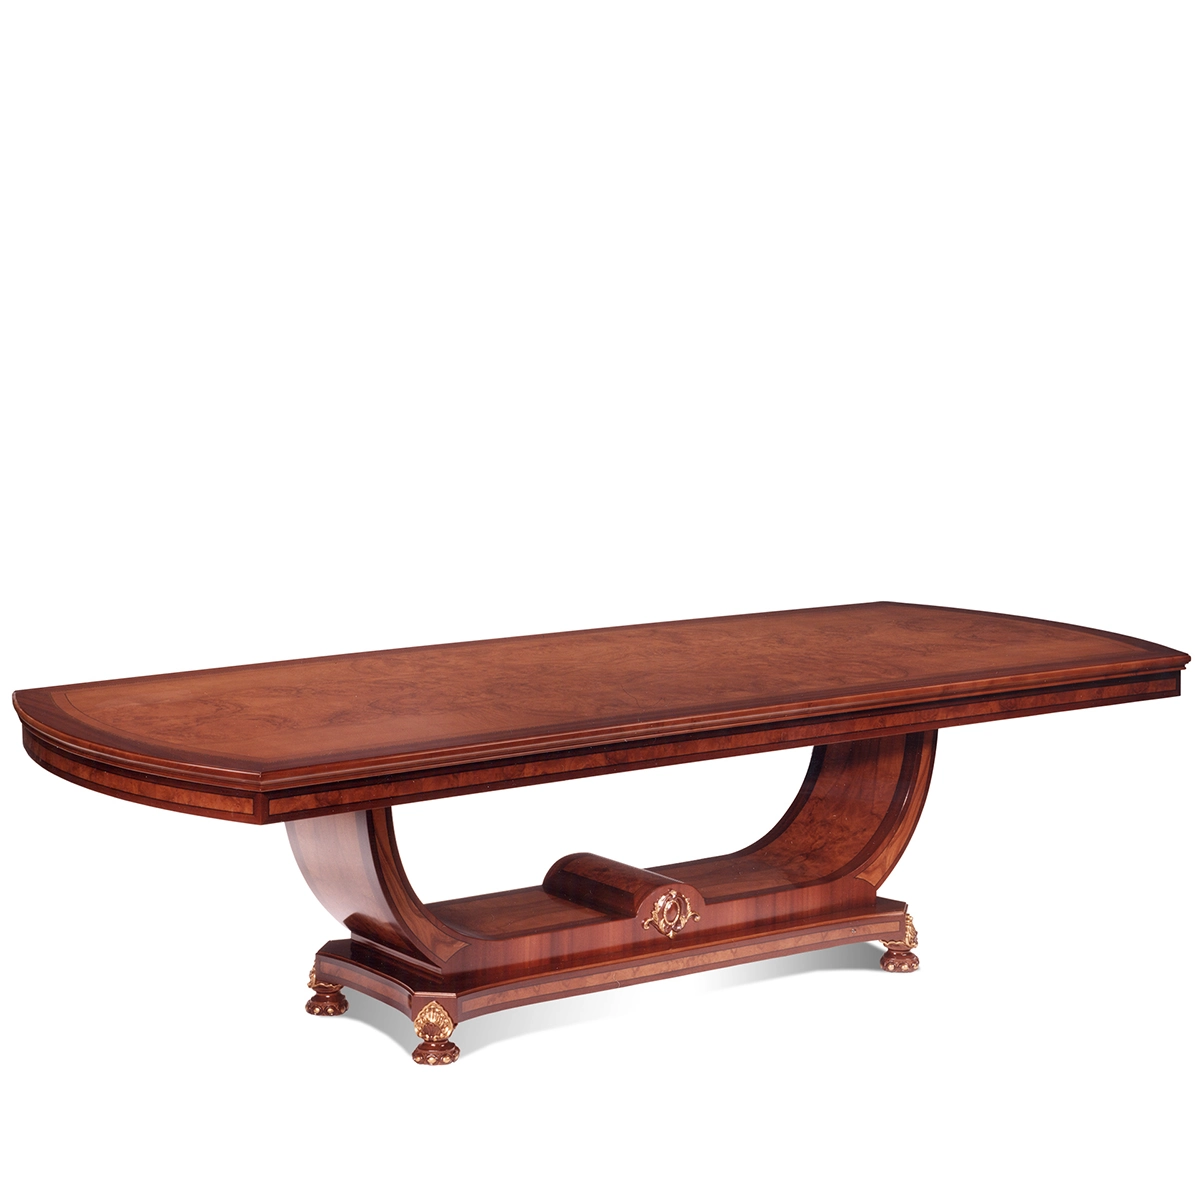 Ducale rectangular table with pedestal C